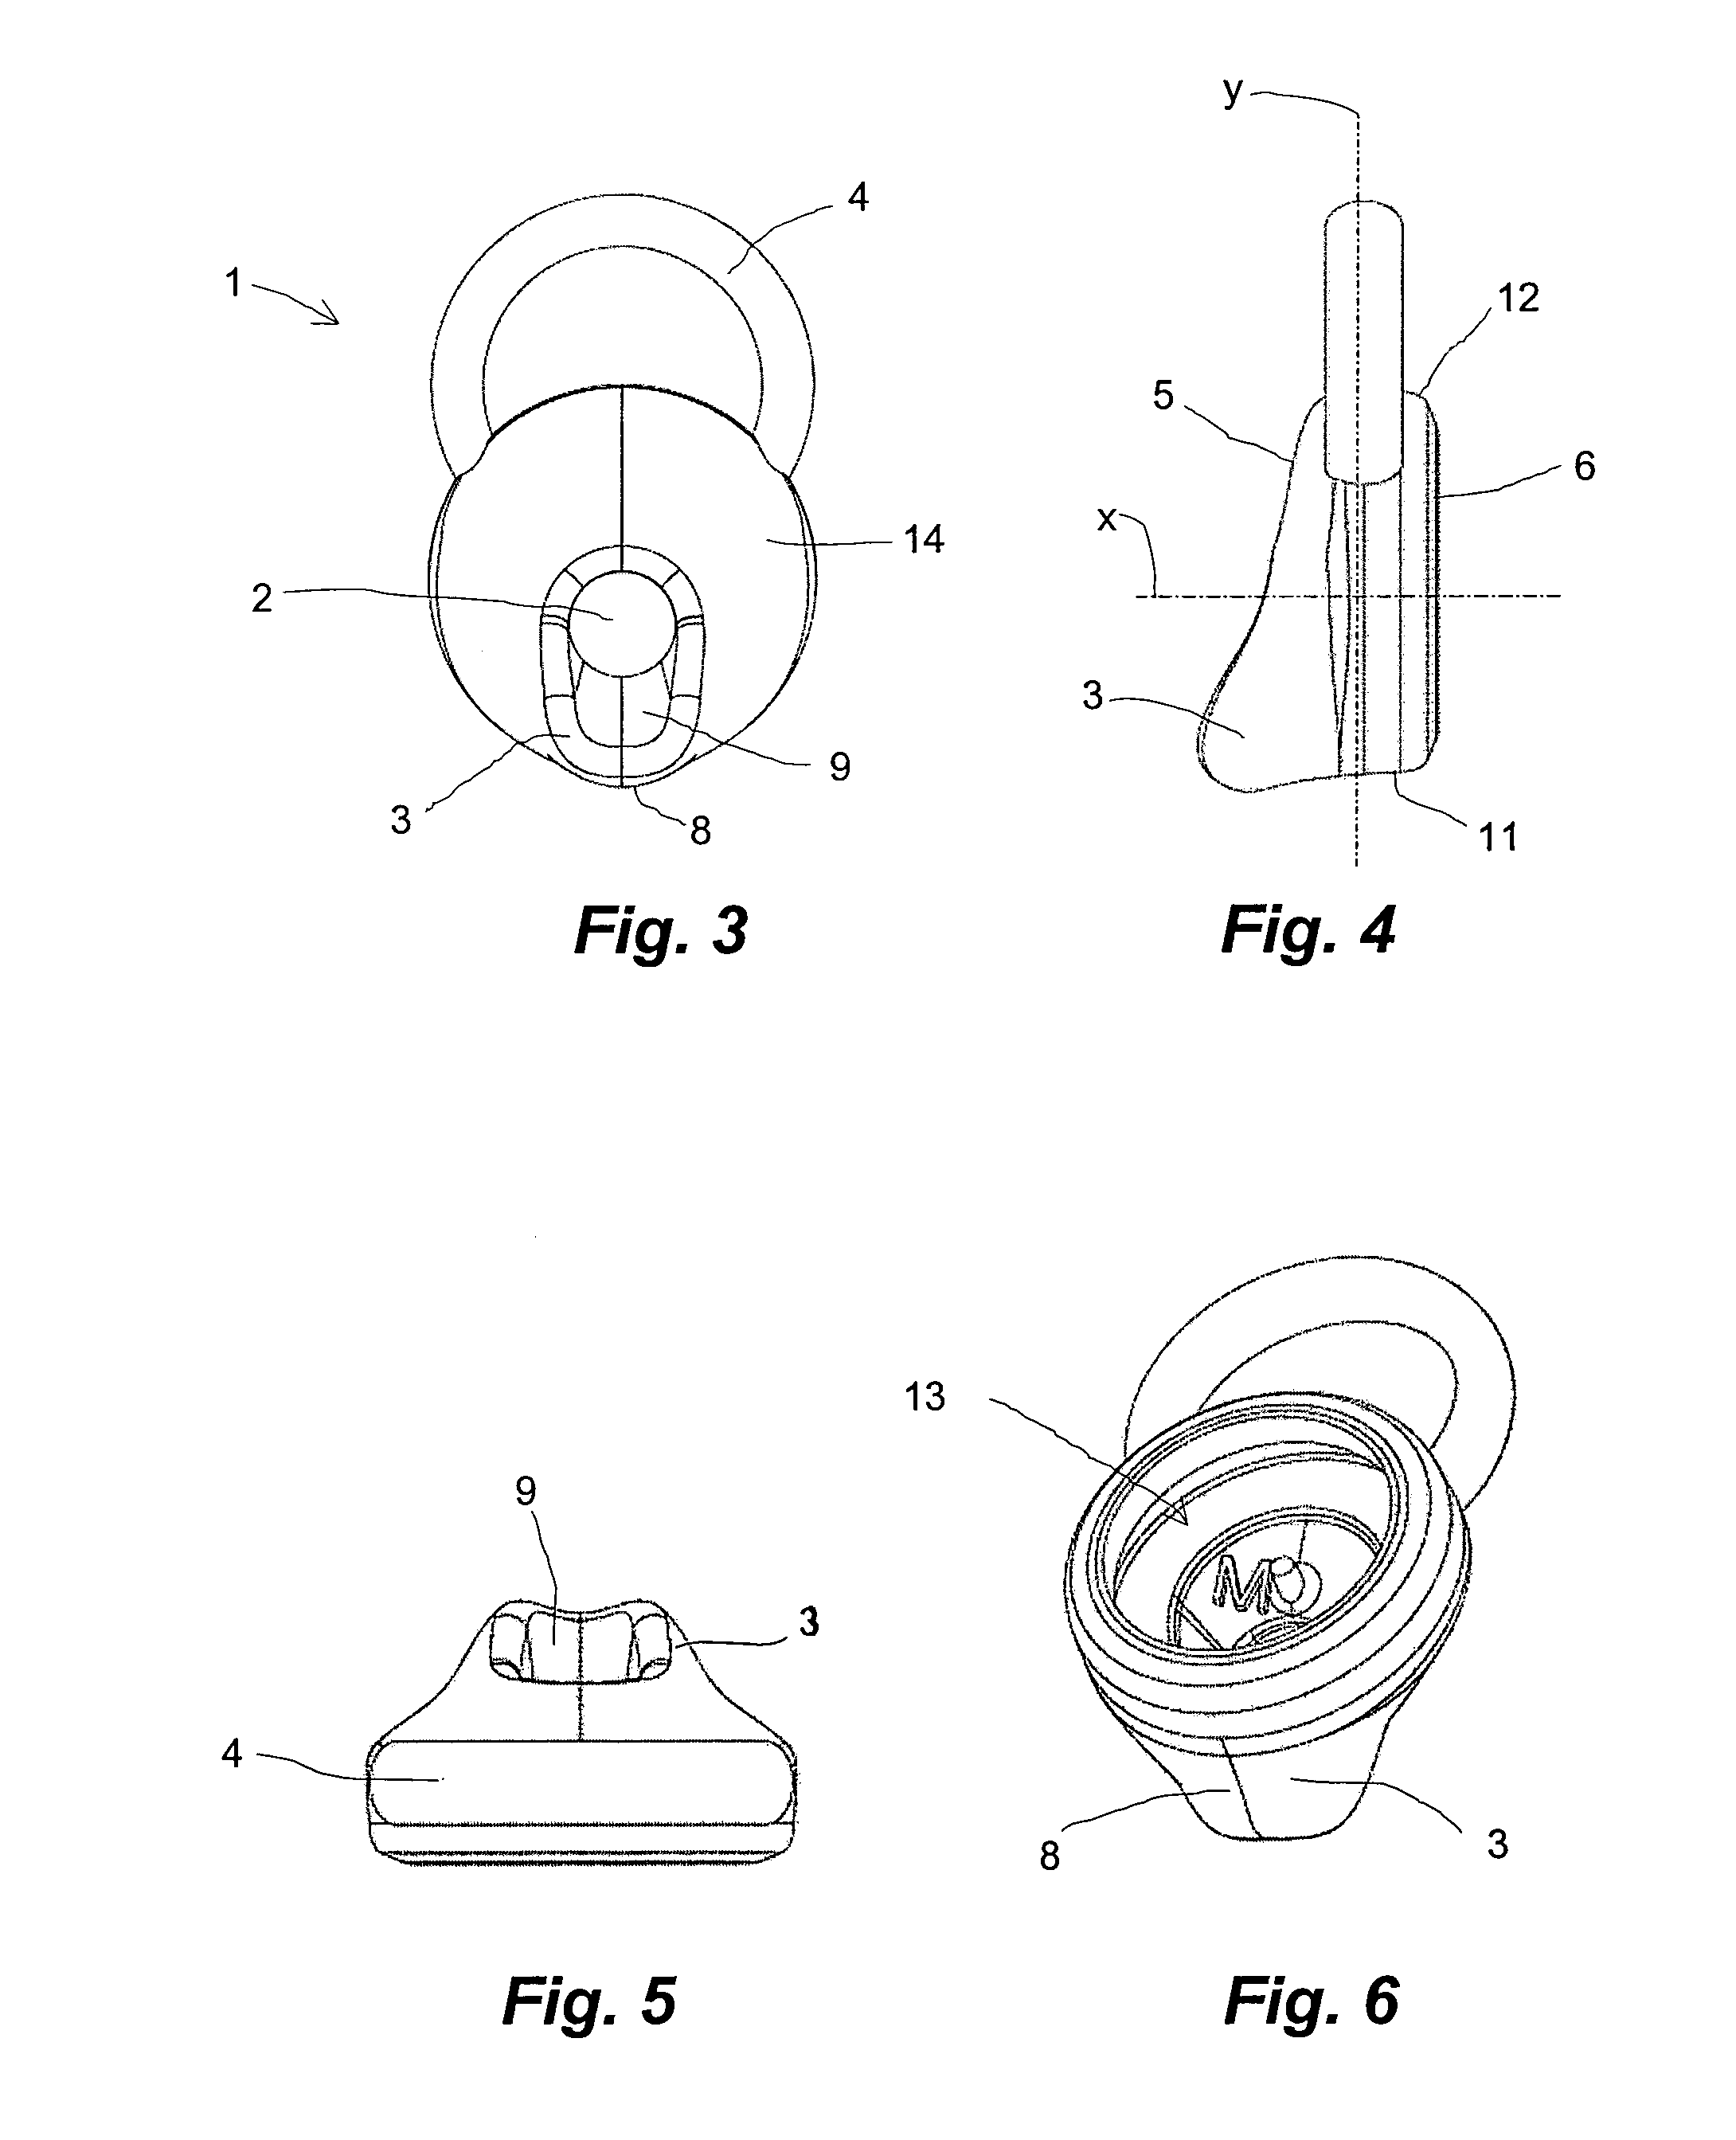 Earphone device with ear canal protrusion